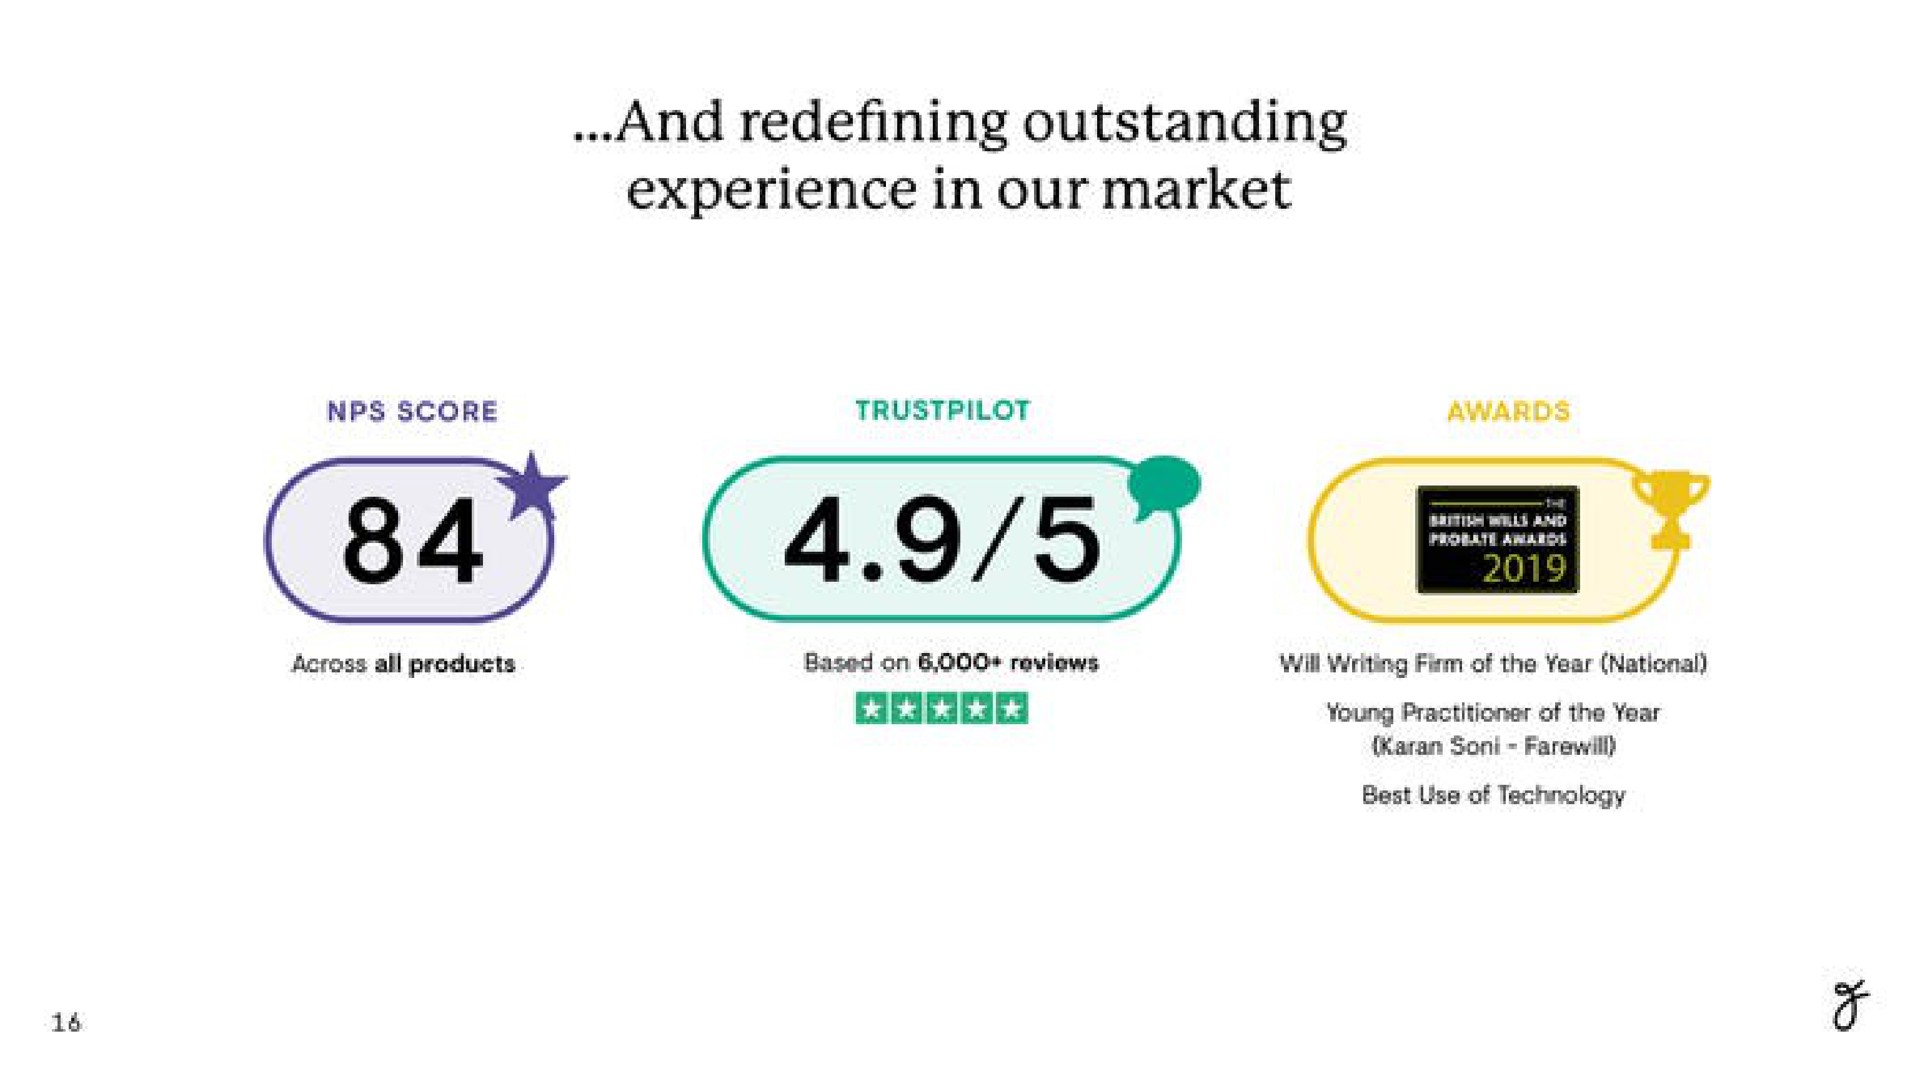 and redefining outstanding experience in our market | Farewill